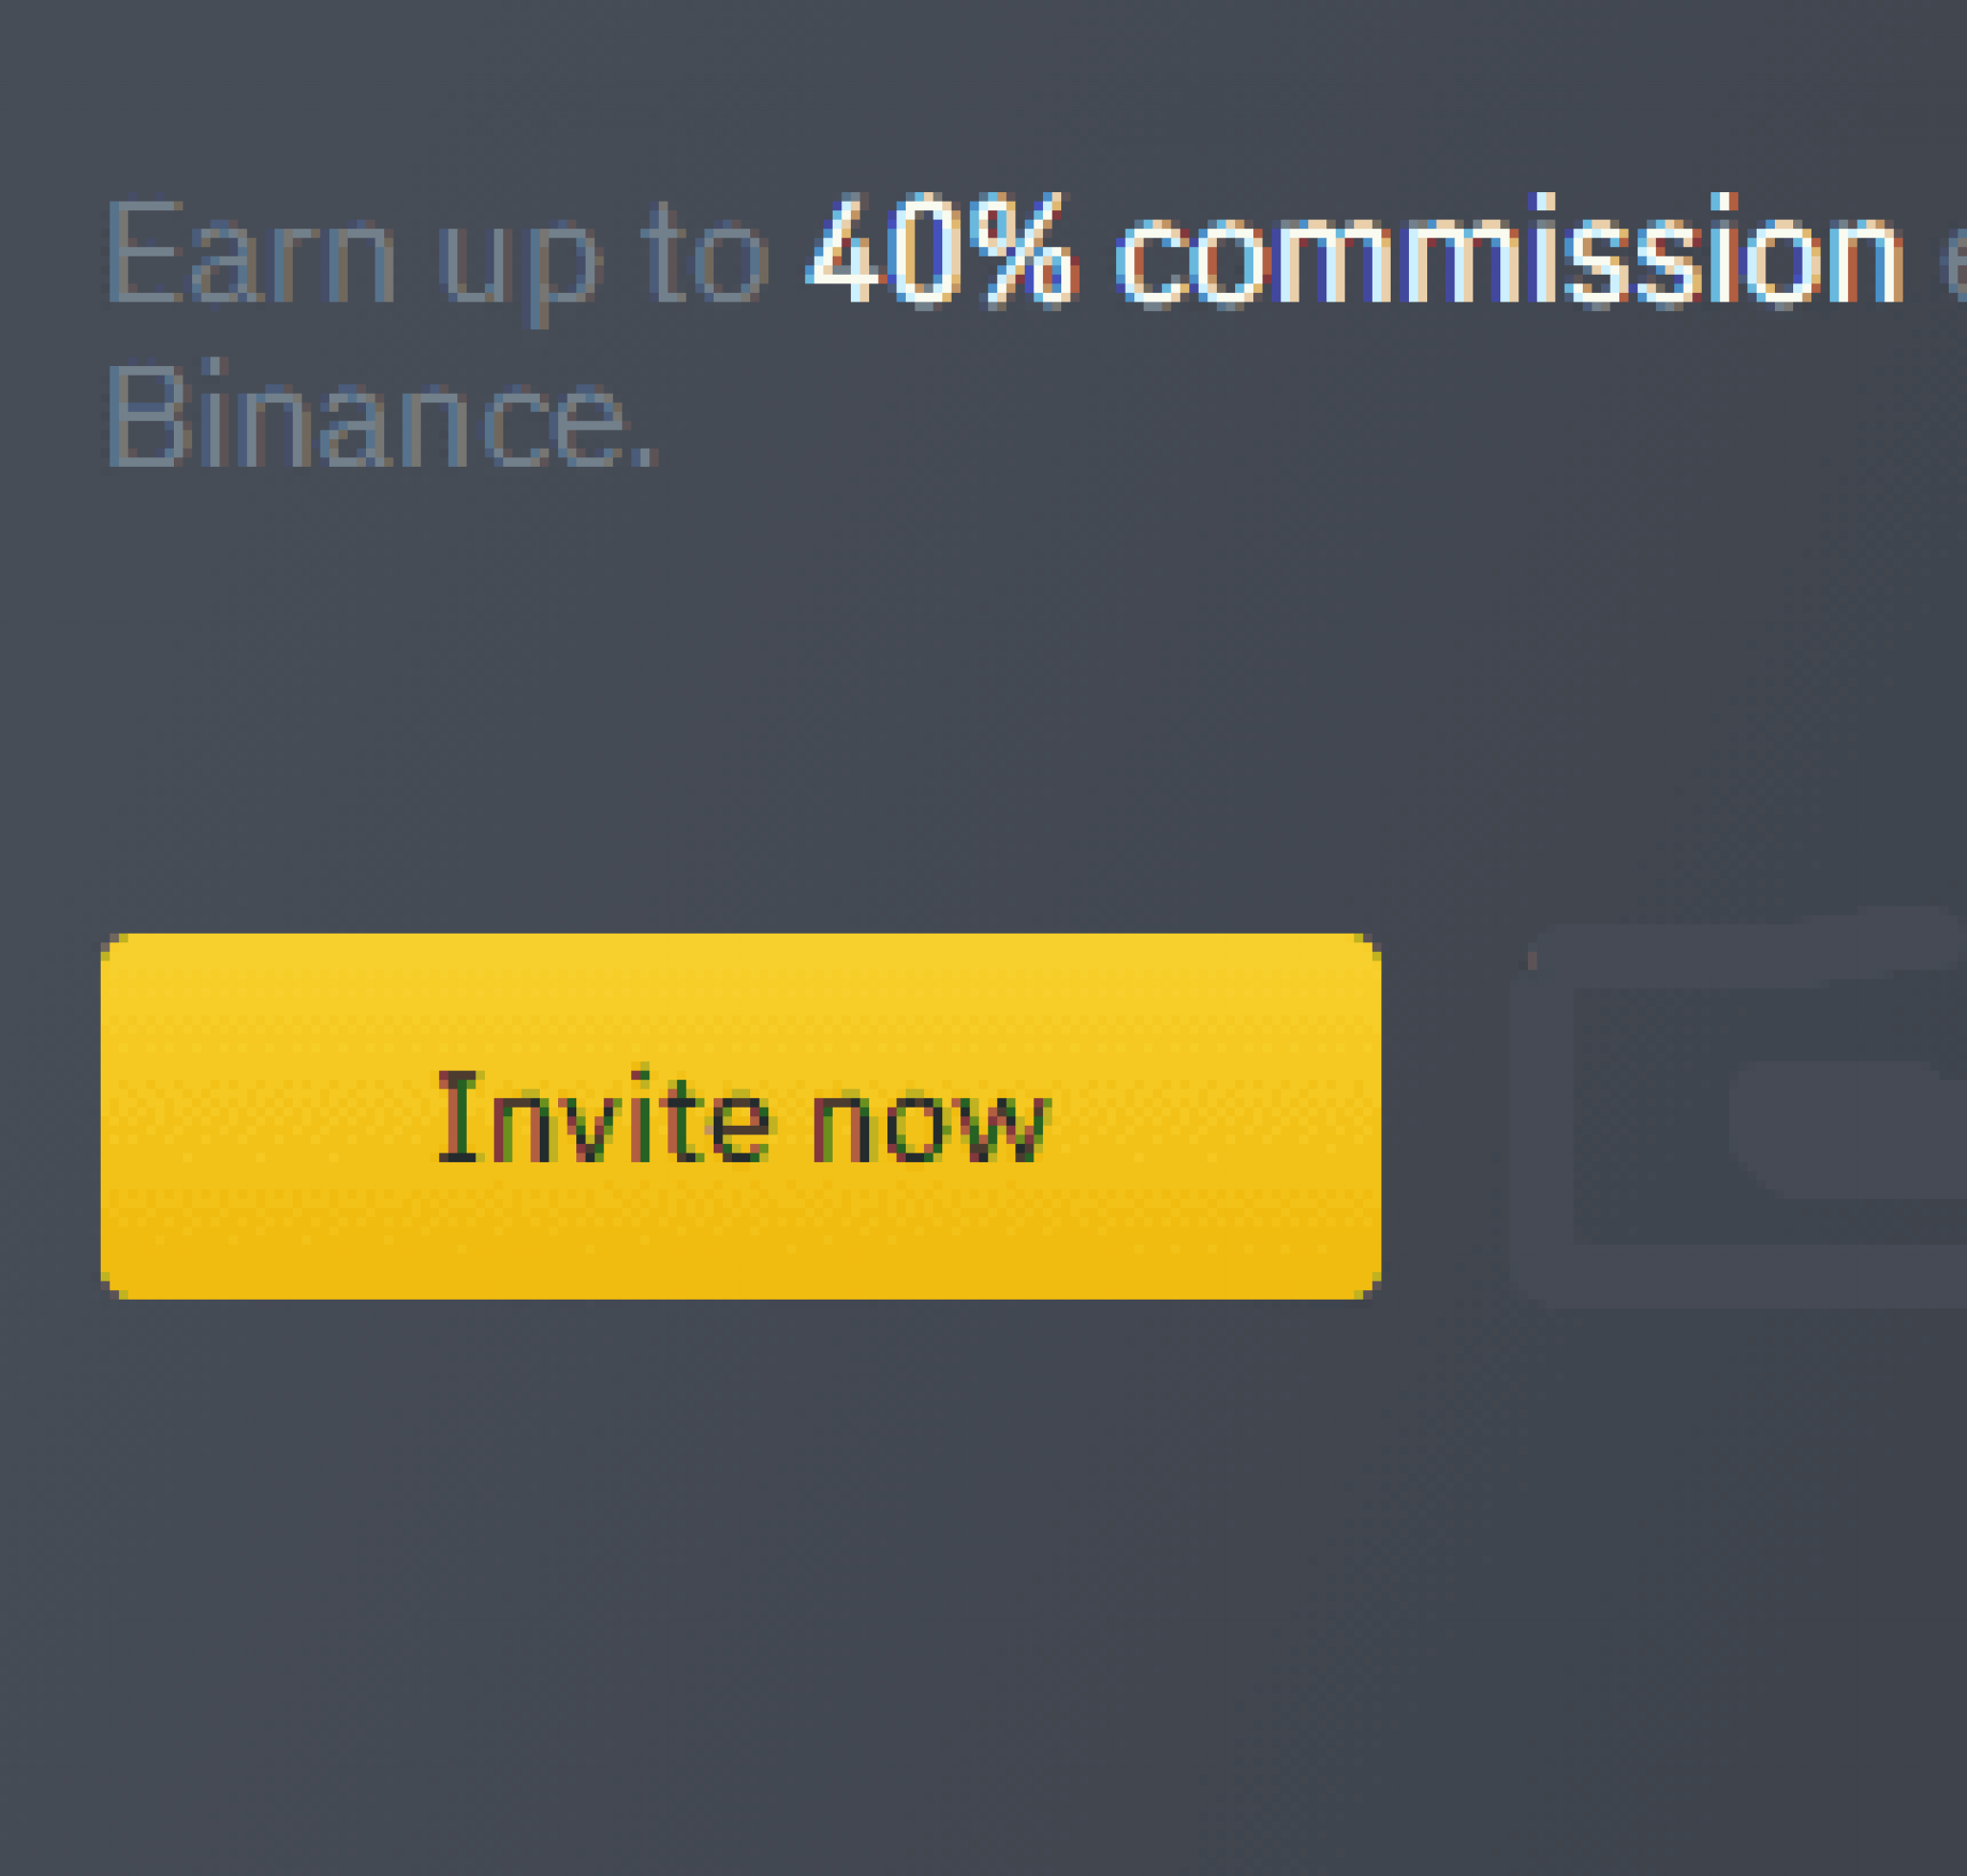 Binance Referral Code [2021]: Get 40% Commission Instantly